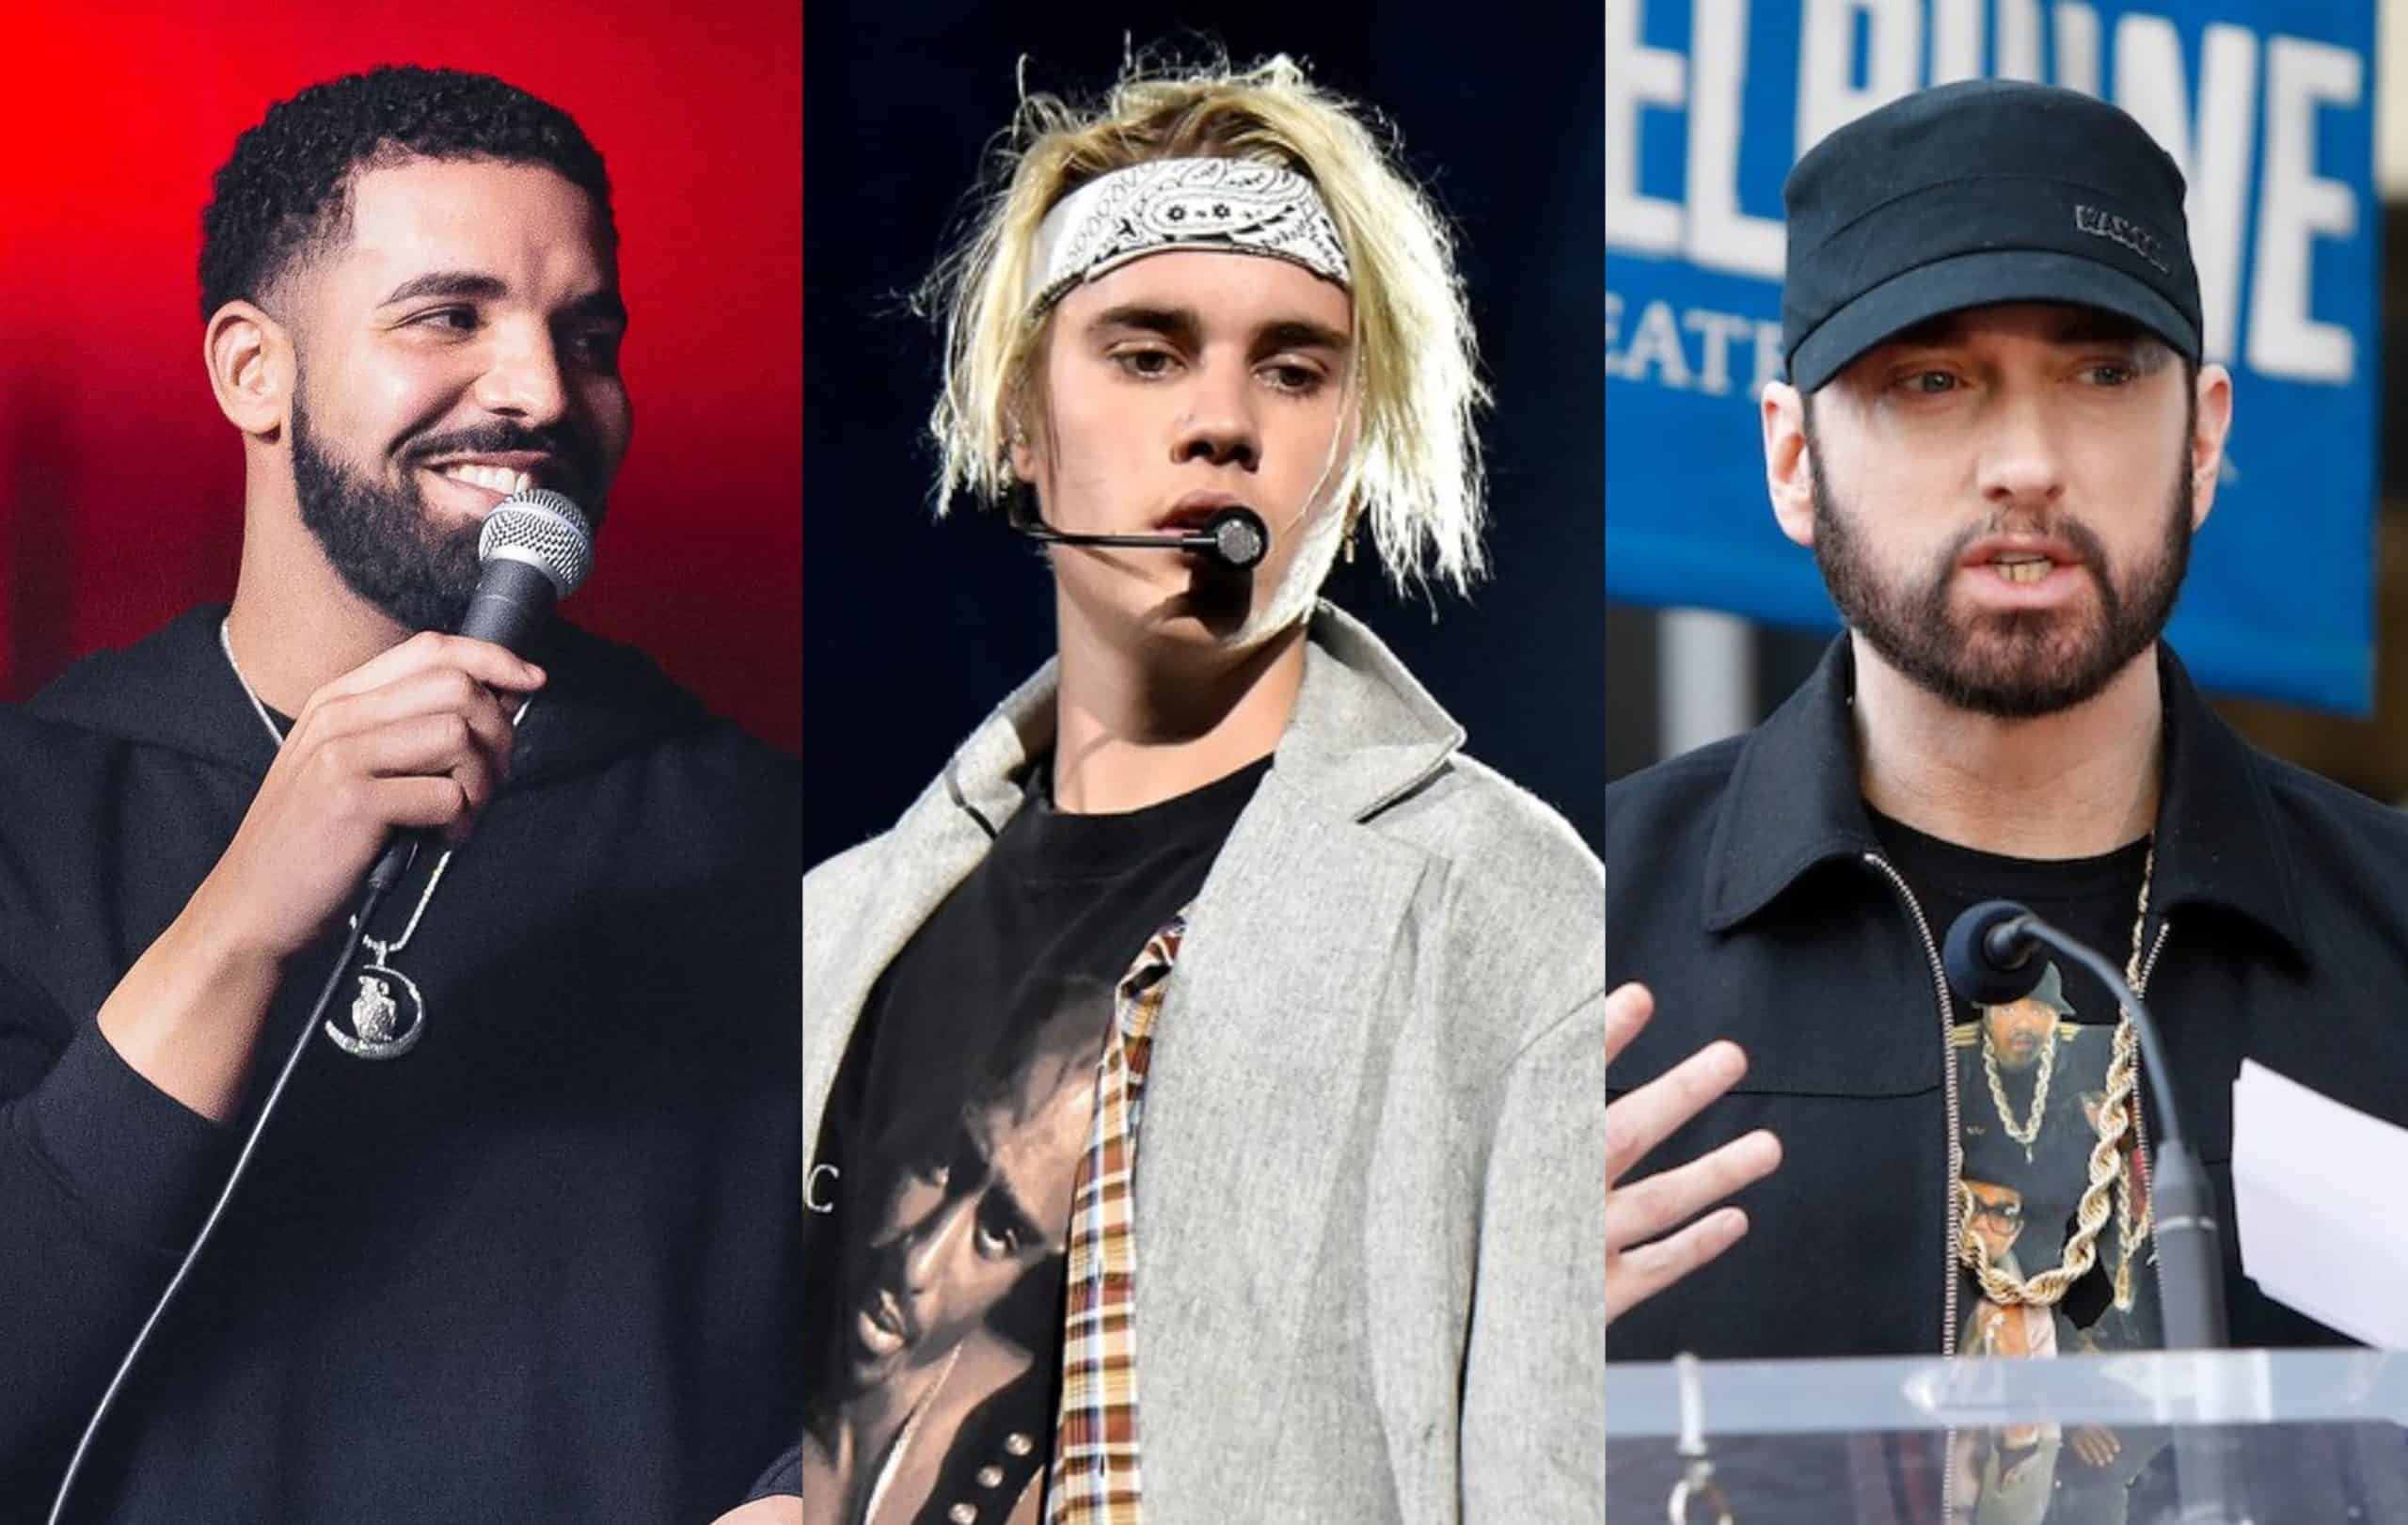 Justin Bieber Lists His Top 5 Rappers Feat. Eminem, Drake & More